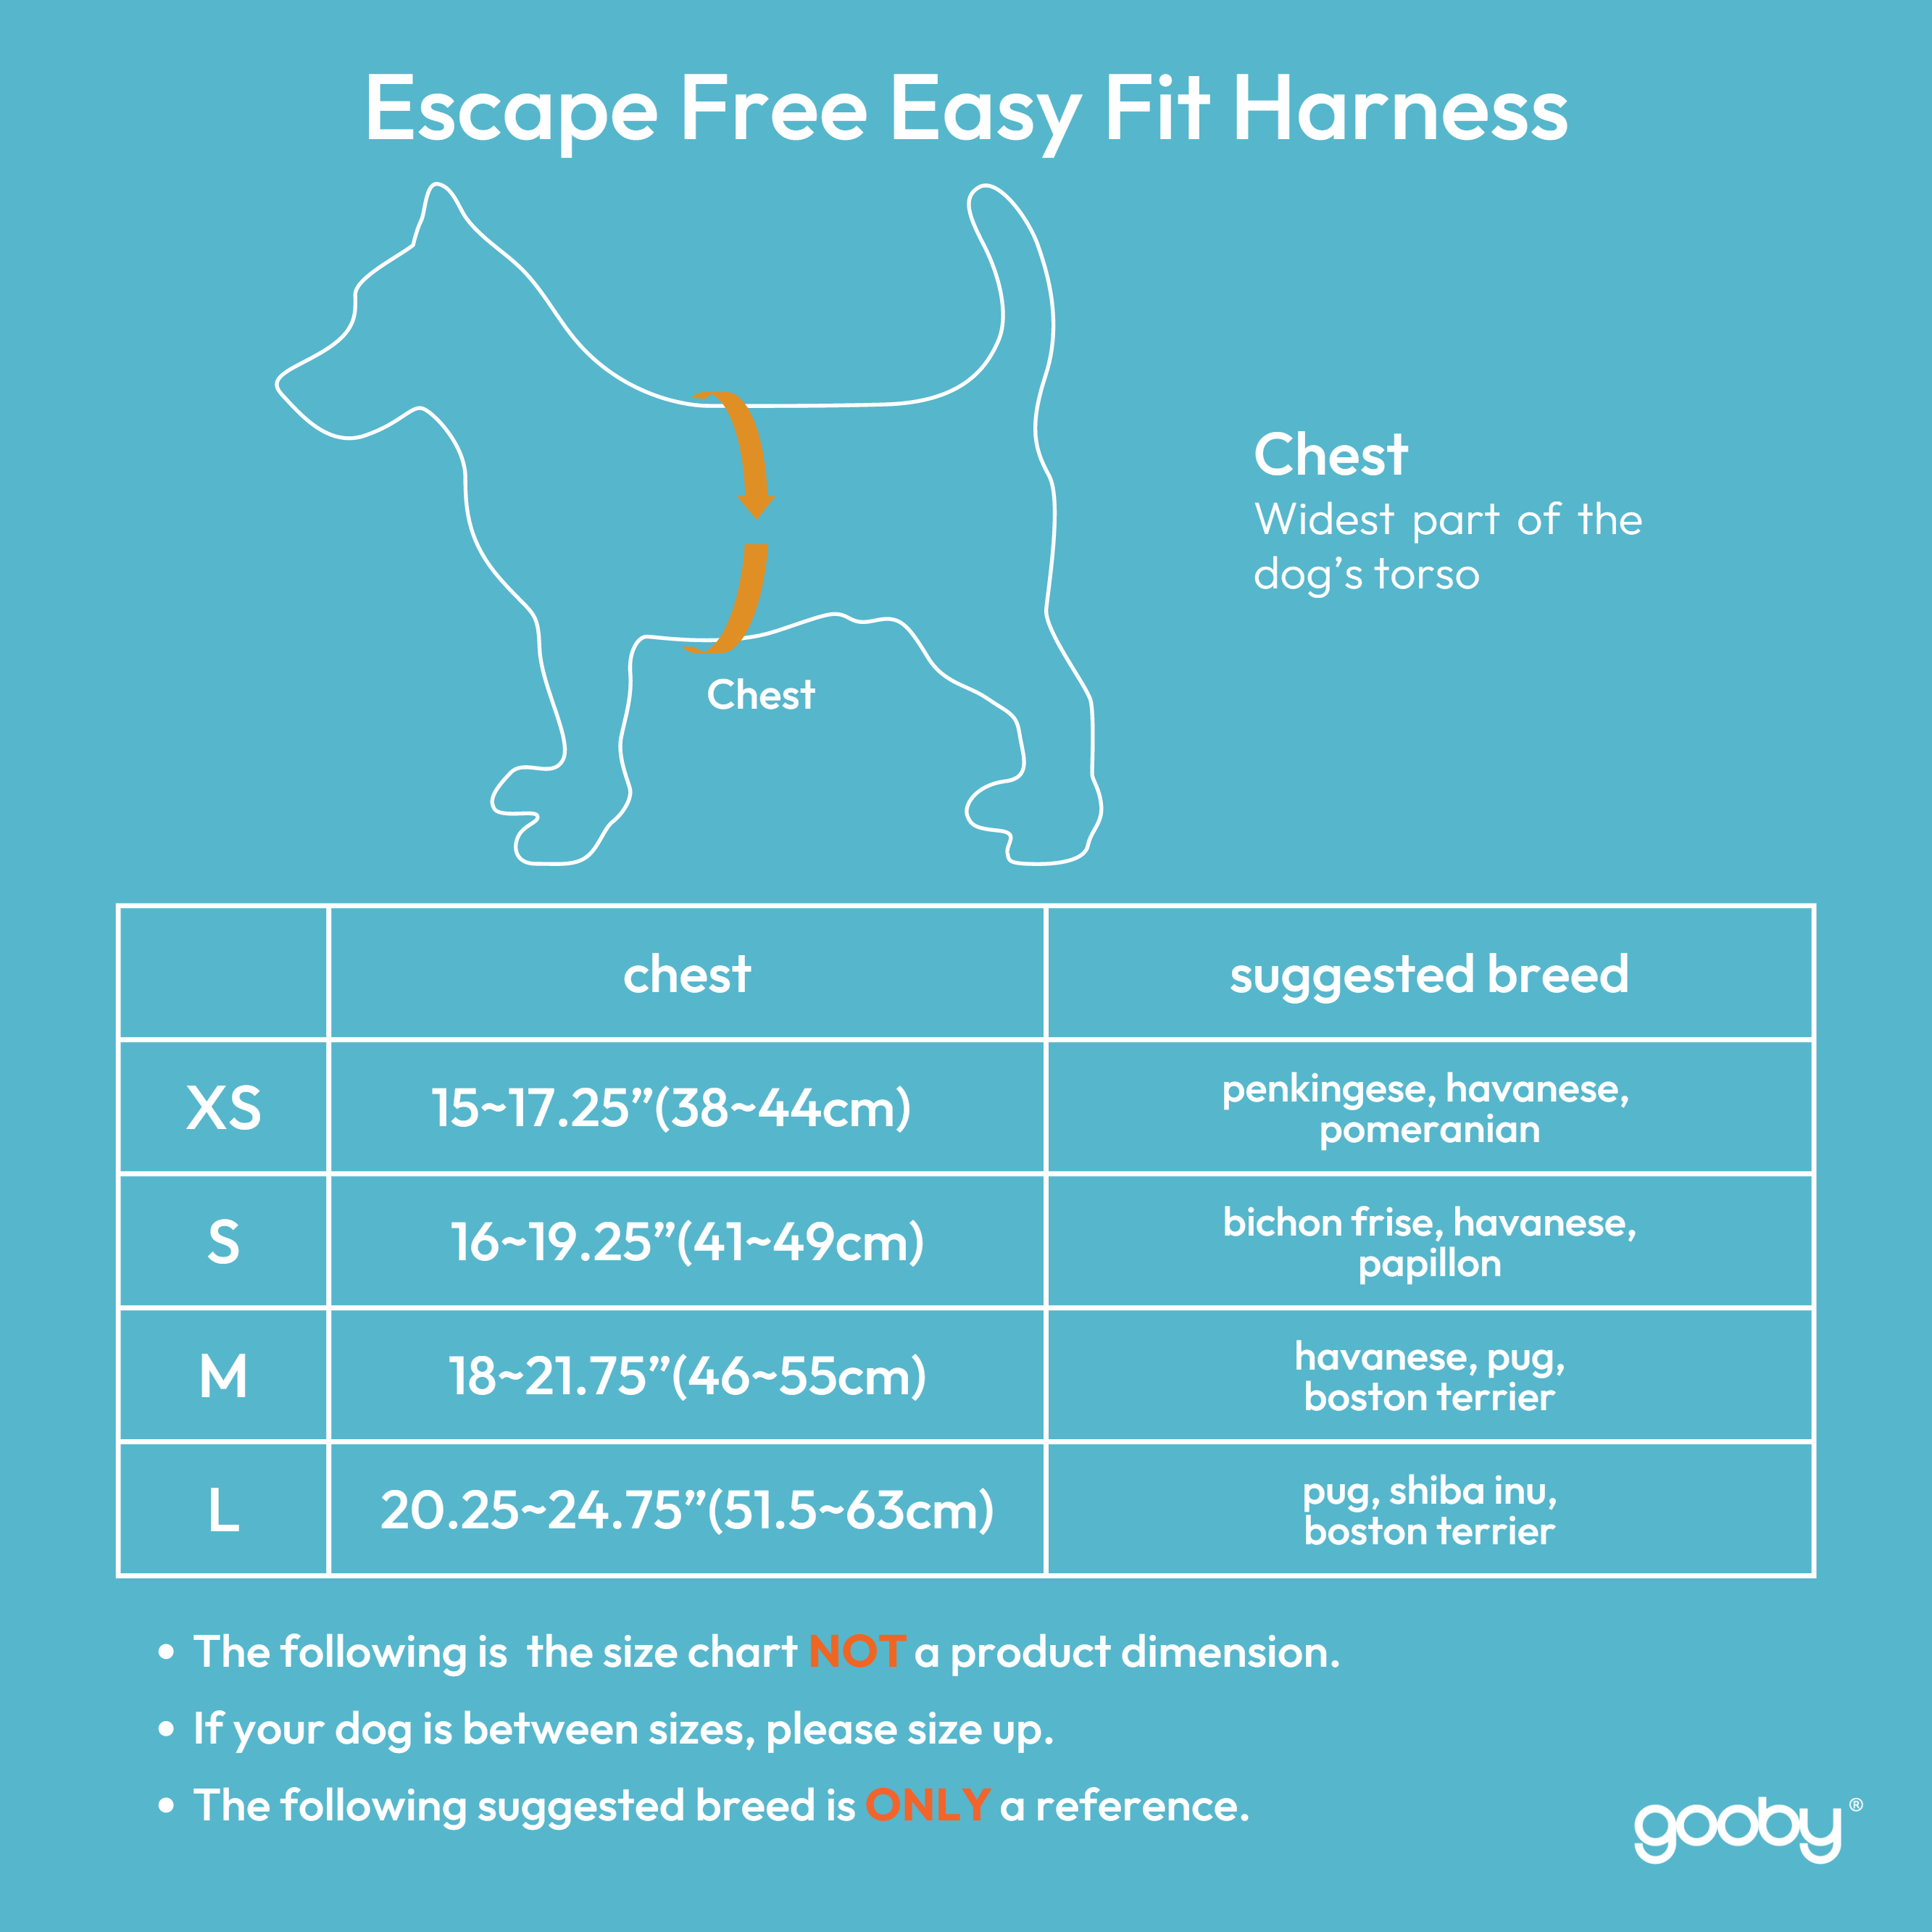 Gooby Escape Free Easy Fit Harness Red, Medium Escape Free Step-In  Harness with Neoprene Body for Small Dogs and Medium Dogs Indoor and  Outdoor use